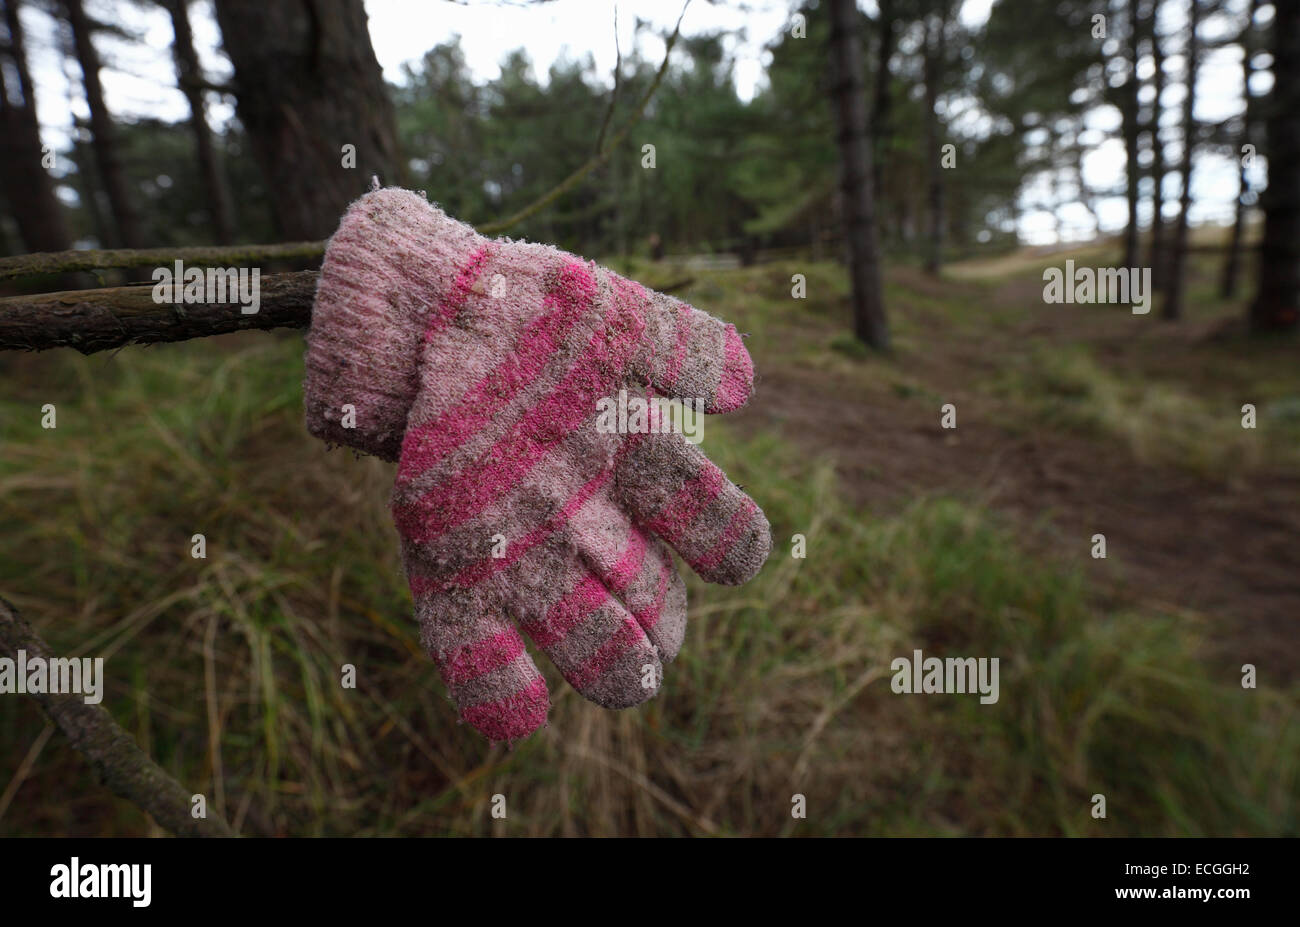 A forgotten child's glove hung on a branch to help someone find it. Stock Photo